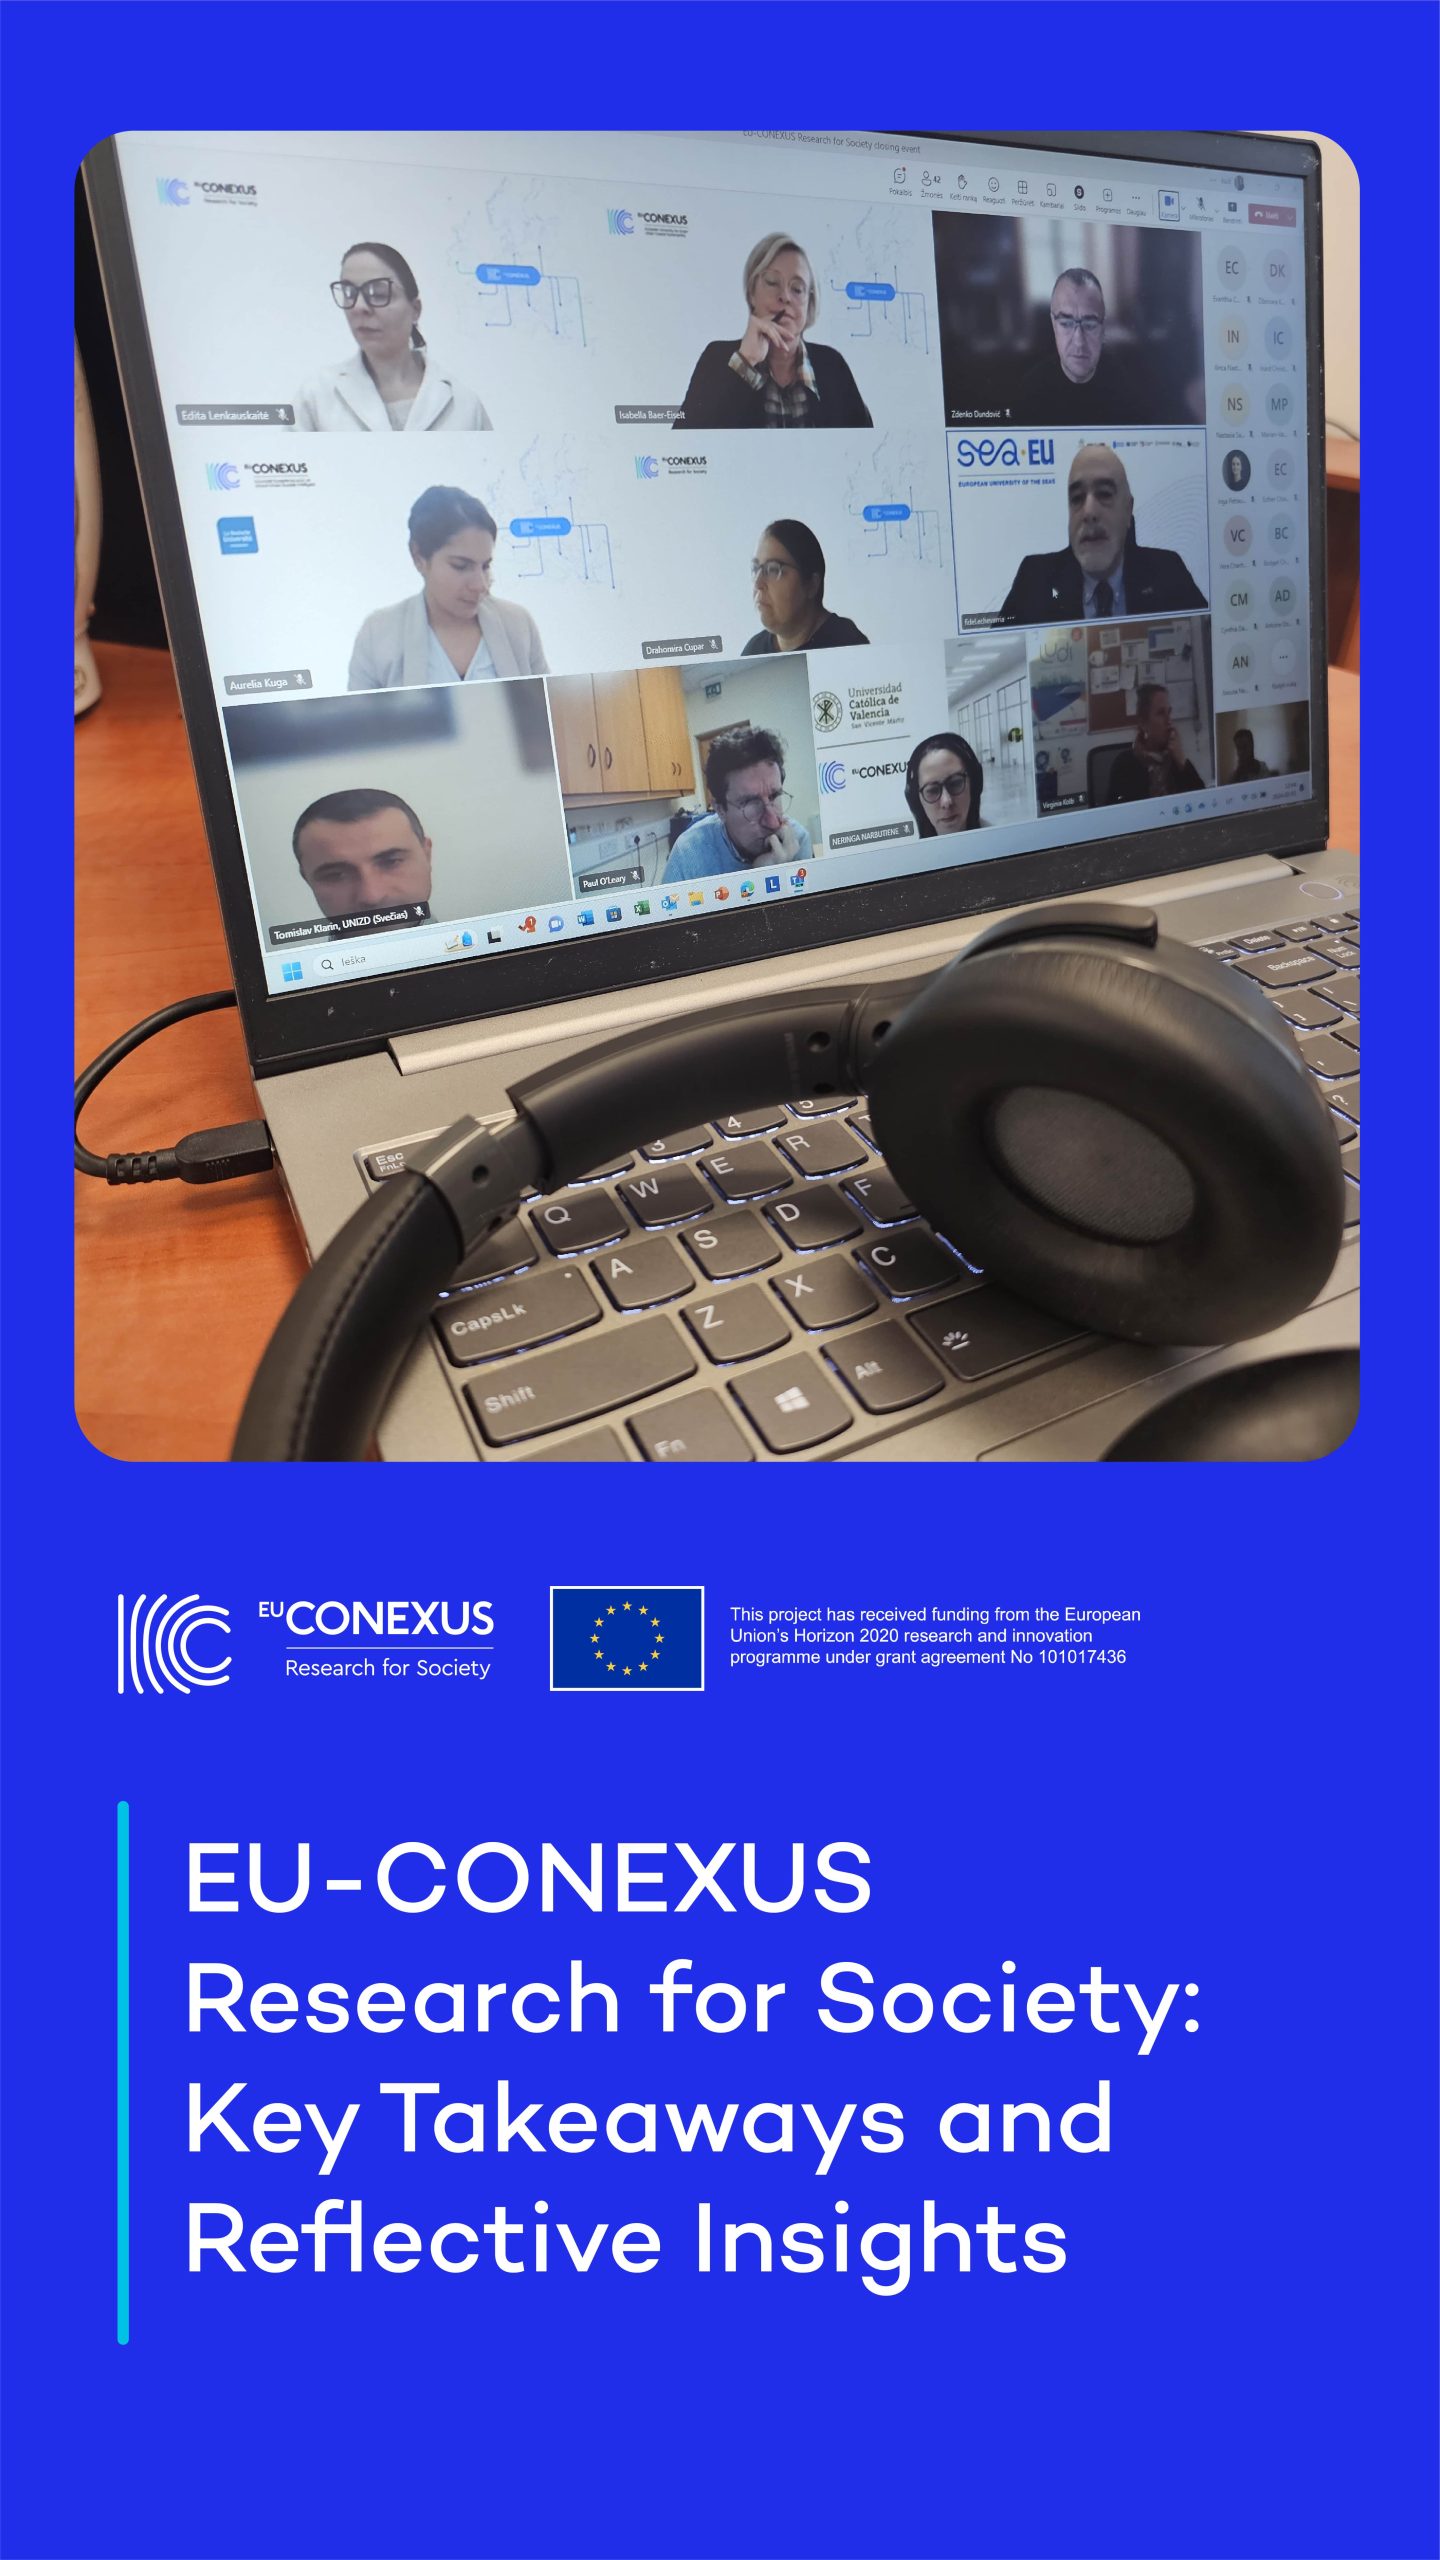 Highlights from the EU-CONEXUS Research for Society Closing Event